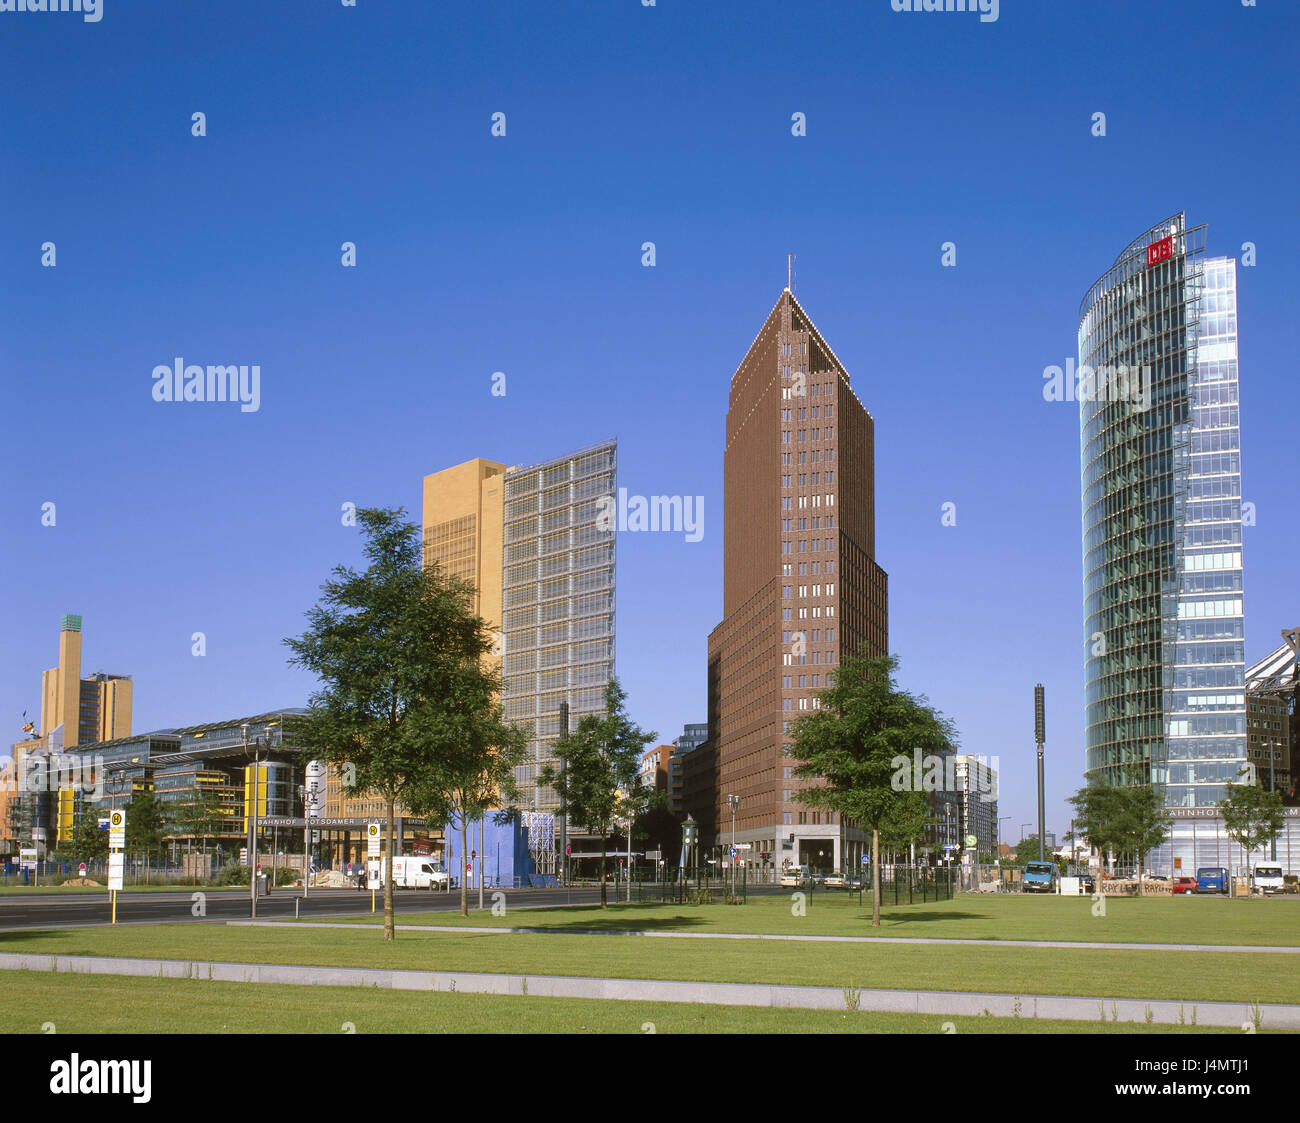 Germany, Berlin, Potsdam square, Debis house, office building, Kollhoff tower, German Railways Tower Europe, town, city, capital, part of town, architect from the left: Renzo Piano, Hans Kollhoff, Helmut Jahn, office building, high rises, architecture, building Stock Photo